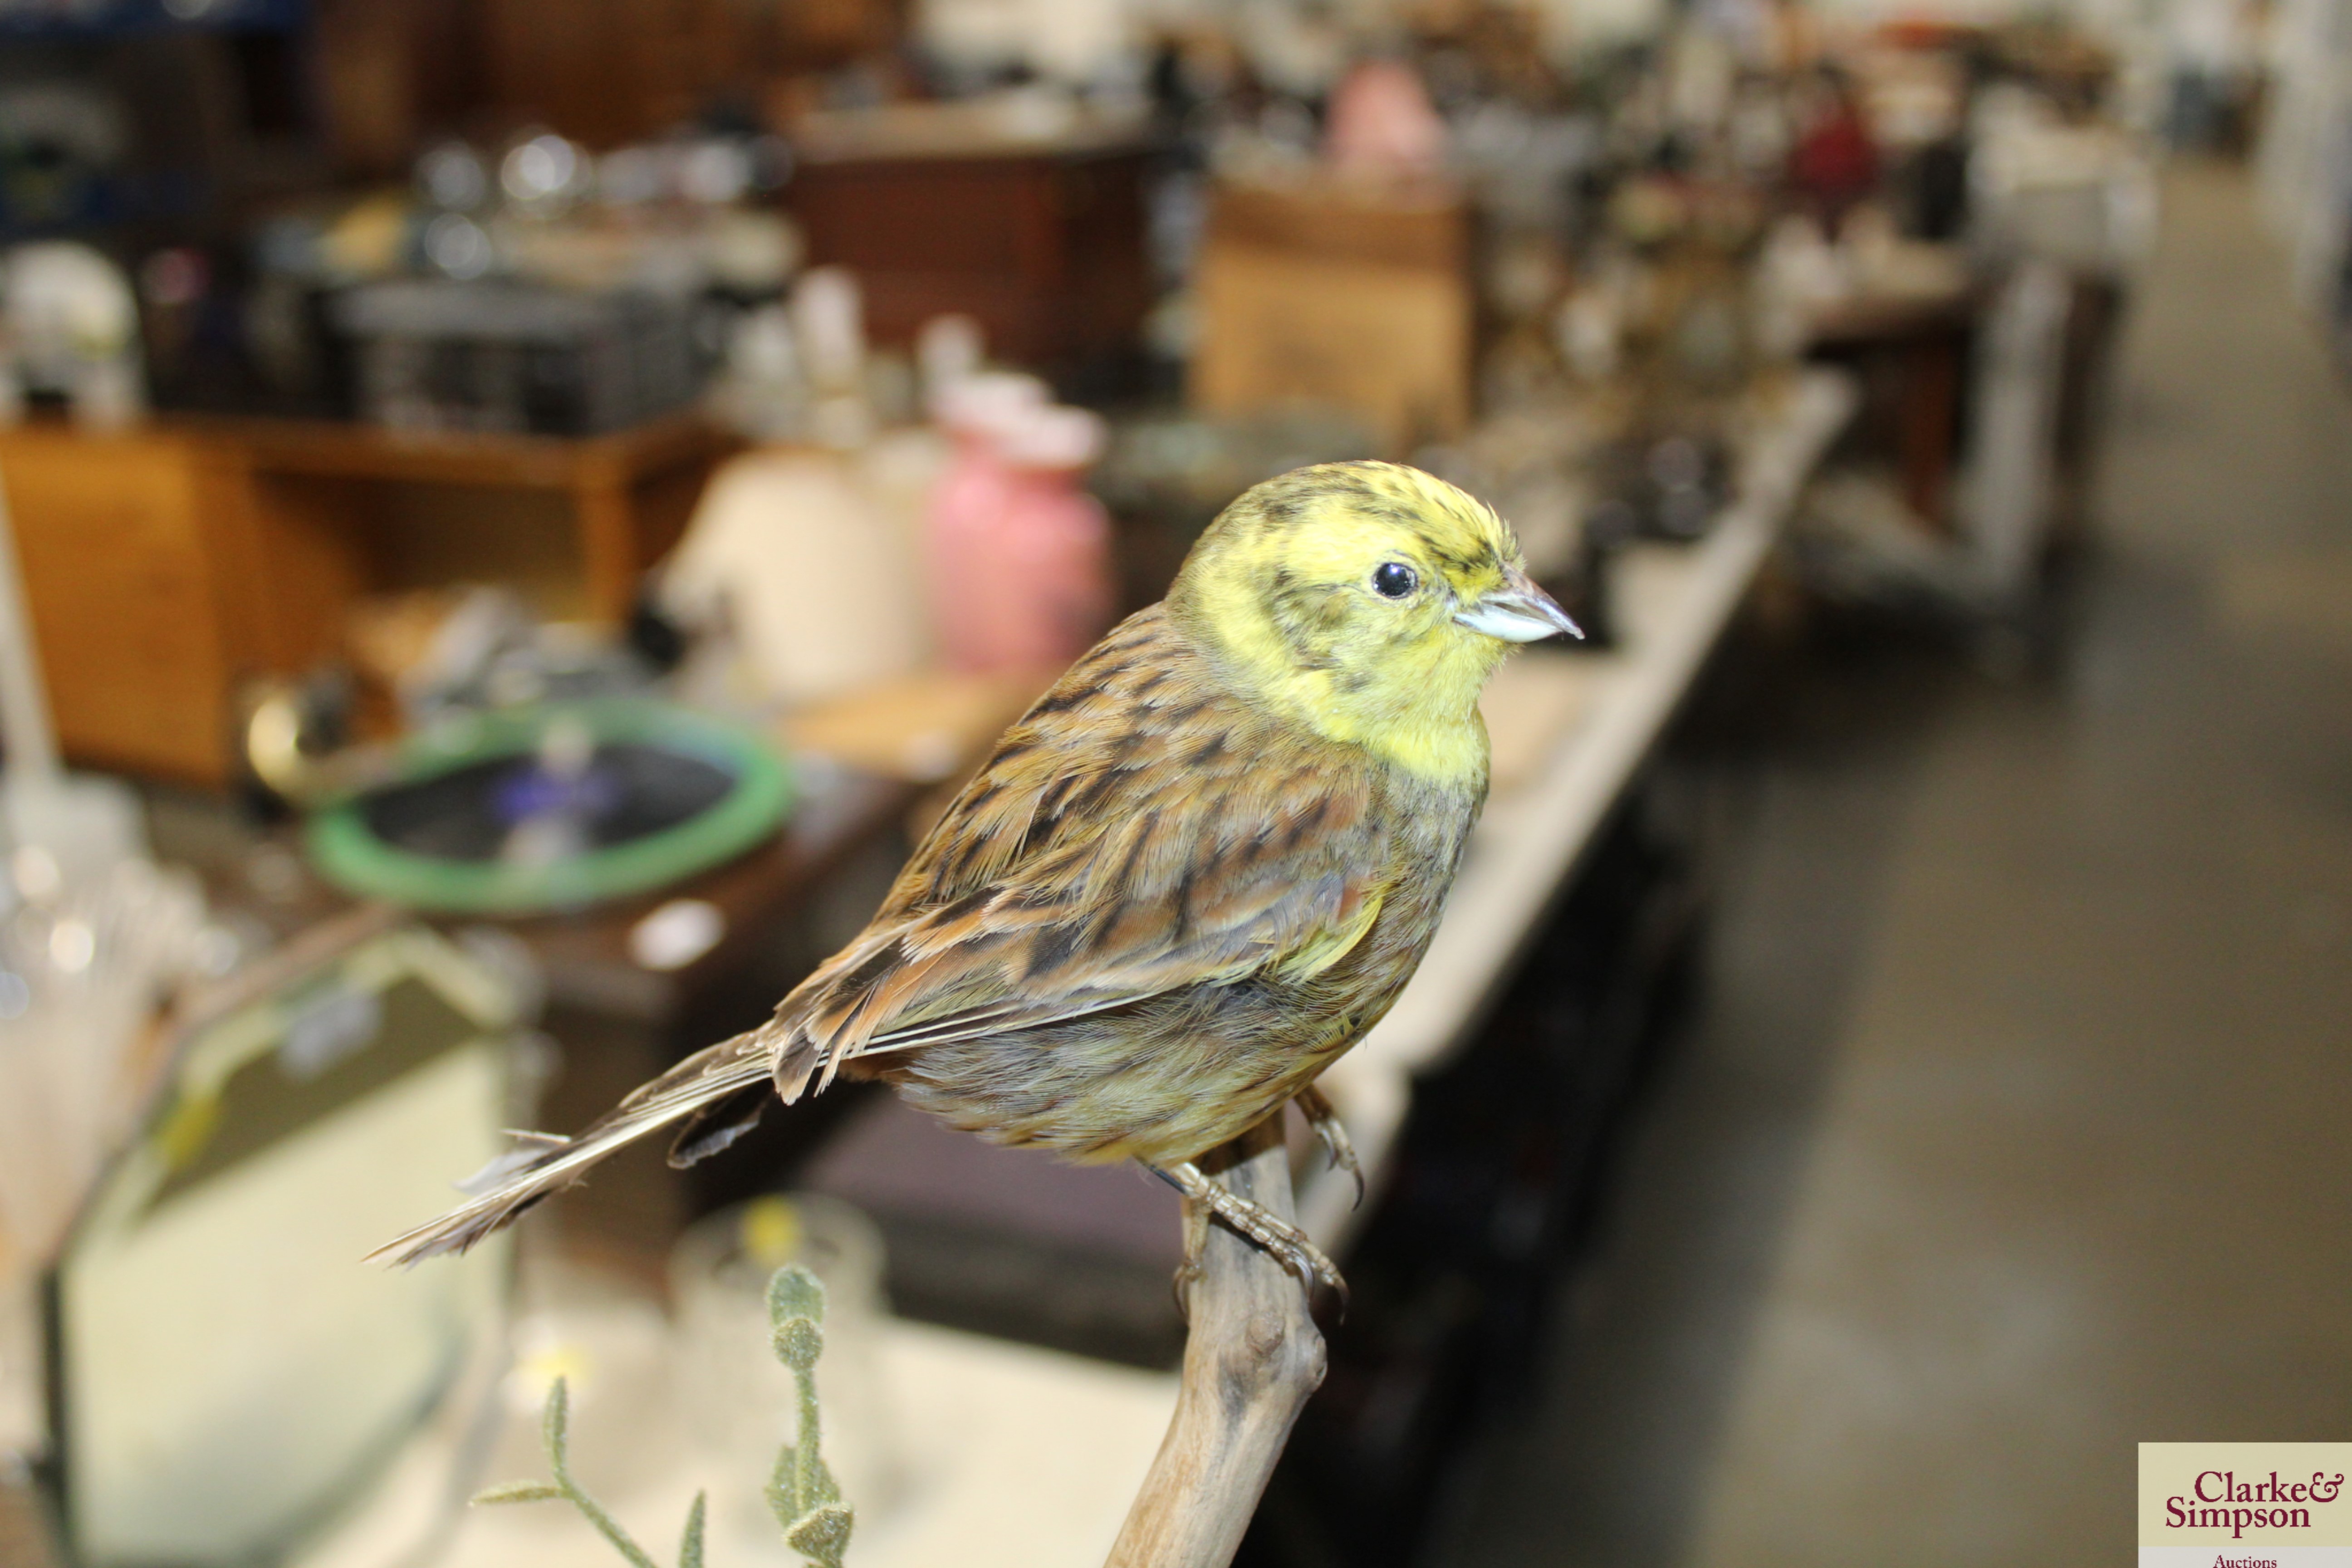 A preserved and mounted yellowhammer bird - Image 3 of 3